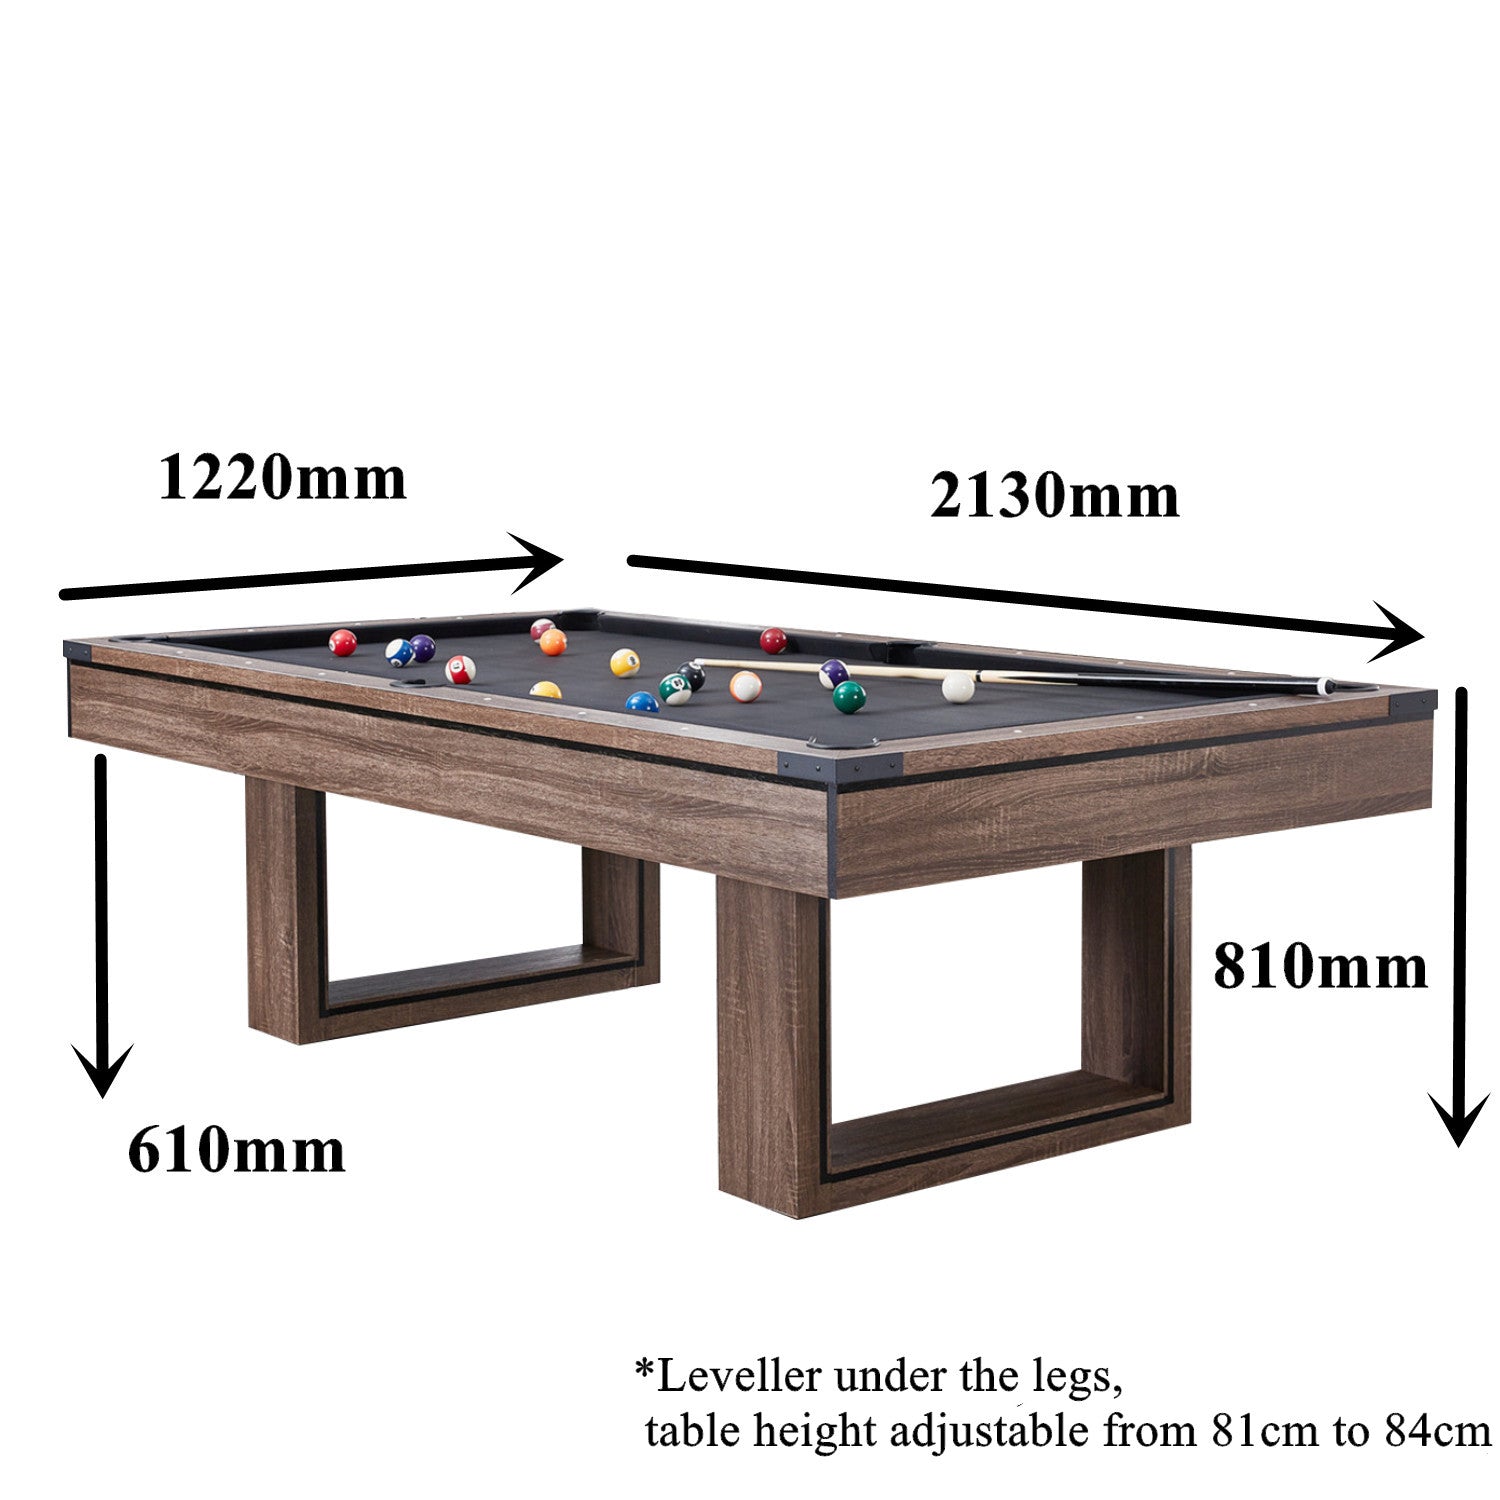 Ocala Dining Pool Table-7FT 3IN1